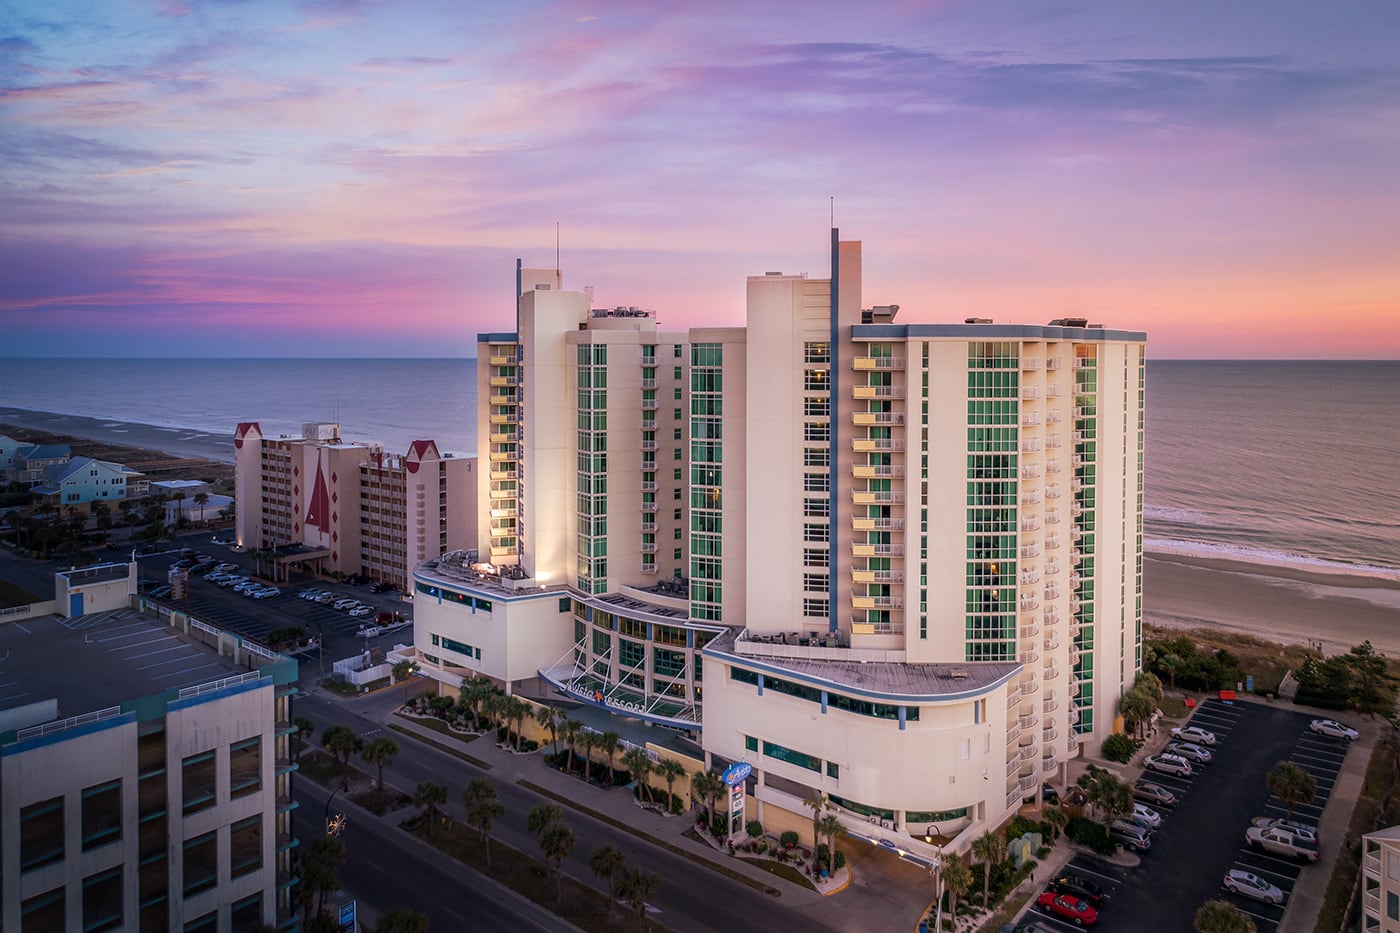 Myrtle Beach Seaside Resorts Condo Hotel Collection Goes Live with Contactless Guest Journey Powered by Zaplox and Maestro PMS